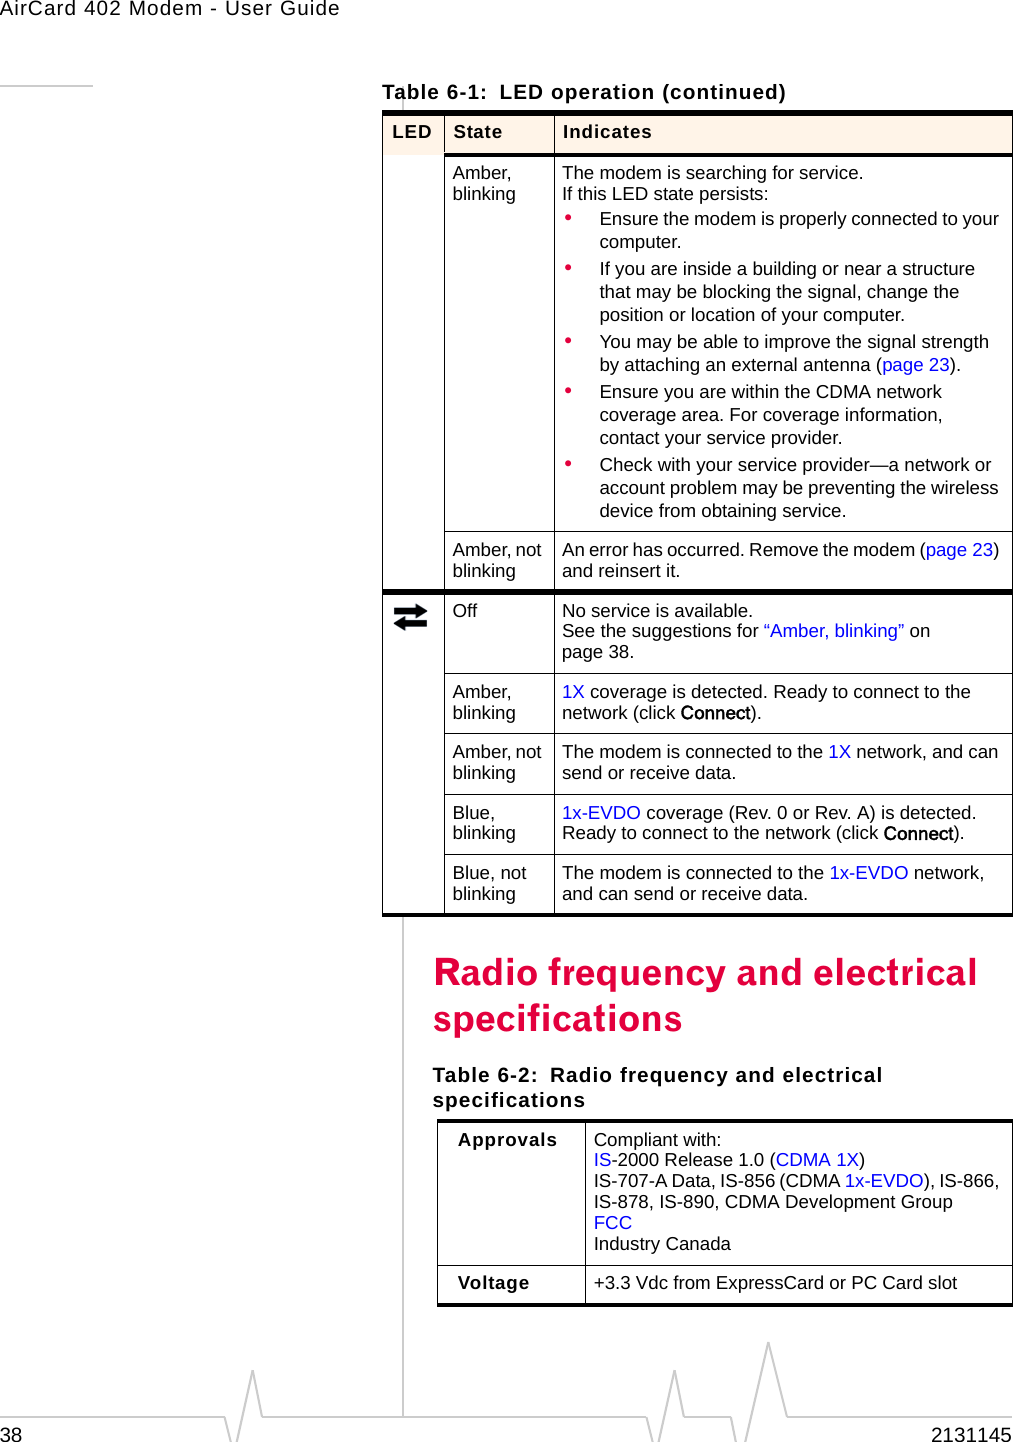 AirCard 402 Modem - User Guide38 2131145Radio frequency and electrical specificationsAmber, blinking The modem is searching for service.If this LED state persists:•Ensure the modem is properly connected to your computer.•If you are inside a building or near a structure that may be blocking the signal, change the position or location of your computer.•You may be able to improve the signal strength by attaching an external antenna (page 23).•Ensure you are within the CDMA network coverage area. For coverage information, contact your service provider.•Check with your service provider—a network or account problem may be preventing the wireless device from obtaining service.Amber, not blinking An error has occurred. Remove the modem (page 23) and reinsert it.Off No service is available.See the suggestions for “Amber, blinking” on page 38.Amber, blinking 1X coverage is detected. Ready to connect to the network (click Connect).Amber, not blinking The modem is connected to the 1X network, and can send or receive data.Blue, blinking 1x-EVDO coverage (Rev. 0 or Rev. A) is detected. Ready to connect to the network (click Connect).Blue, not blinking The modem is connected to the 1x-EVDO network, and can send or receive data.Table 6-1: LED operation (continued)LED State IndicatesTable 6-2: Radio frequency and electrical specificationsApprovals Compliant with:IS-2000 Release 1.0 (CDMA 1X)IS-707-A Data, IS-856 (CDMA 1x-EVDO), IS-866, IS-878, IS-890, CDMA Development GroupFCCIndustry CanadaVoltage +3.3 Vdc from ExpressCard or PC Card slot